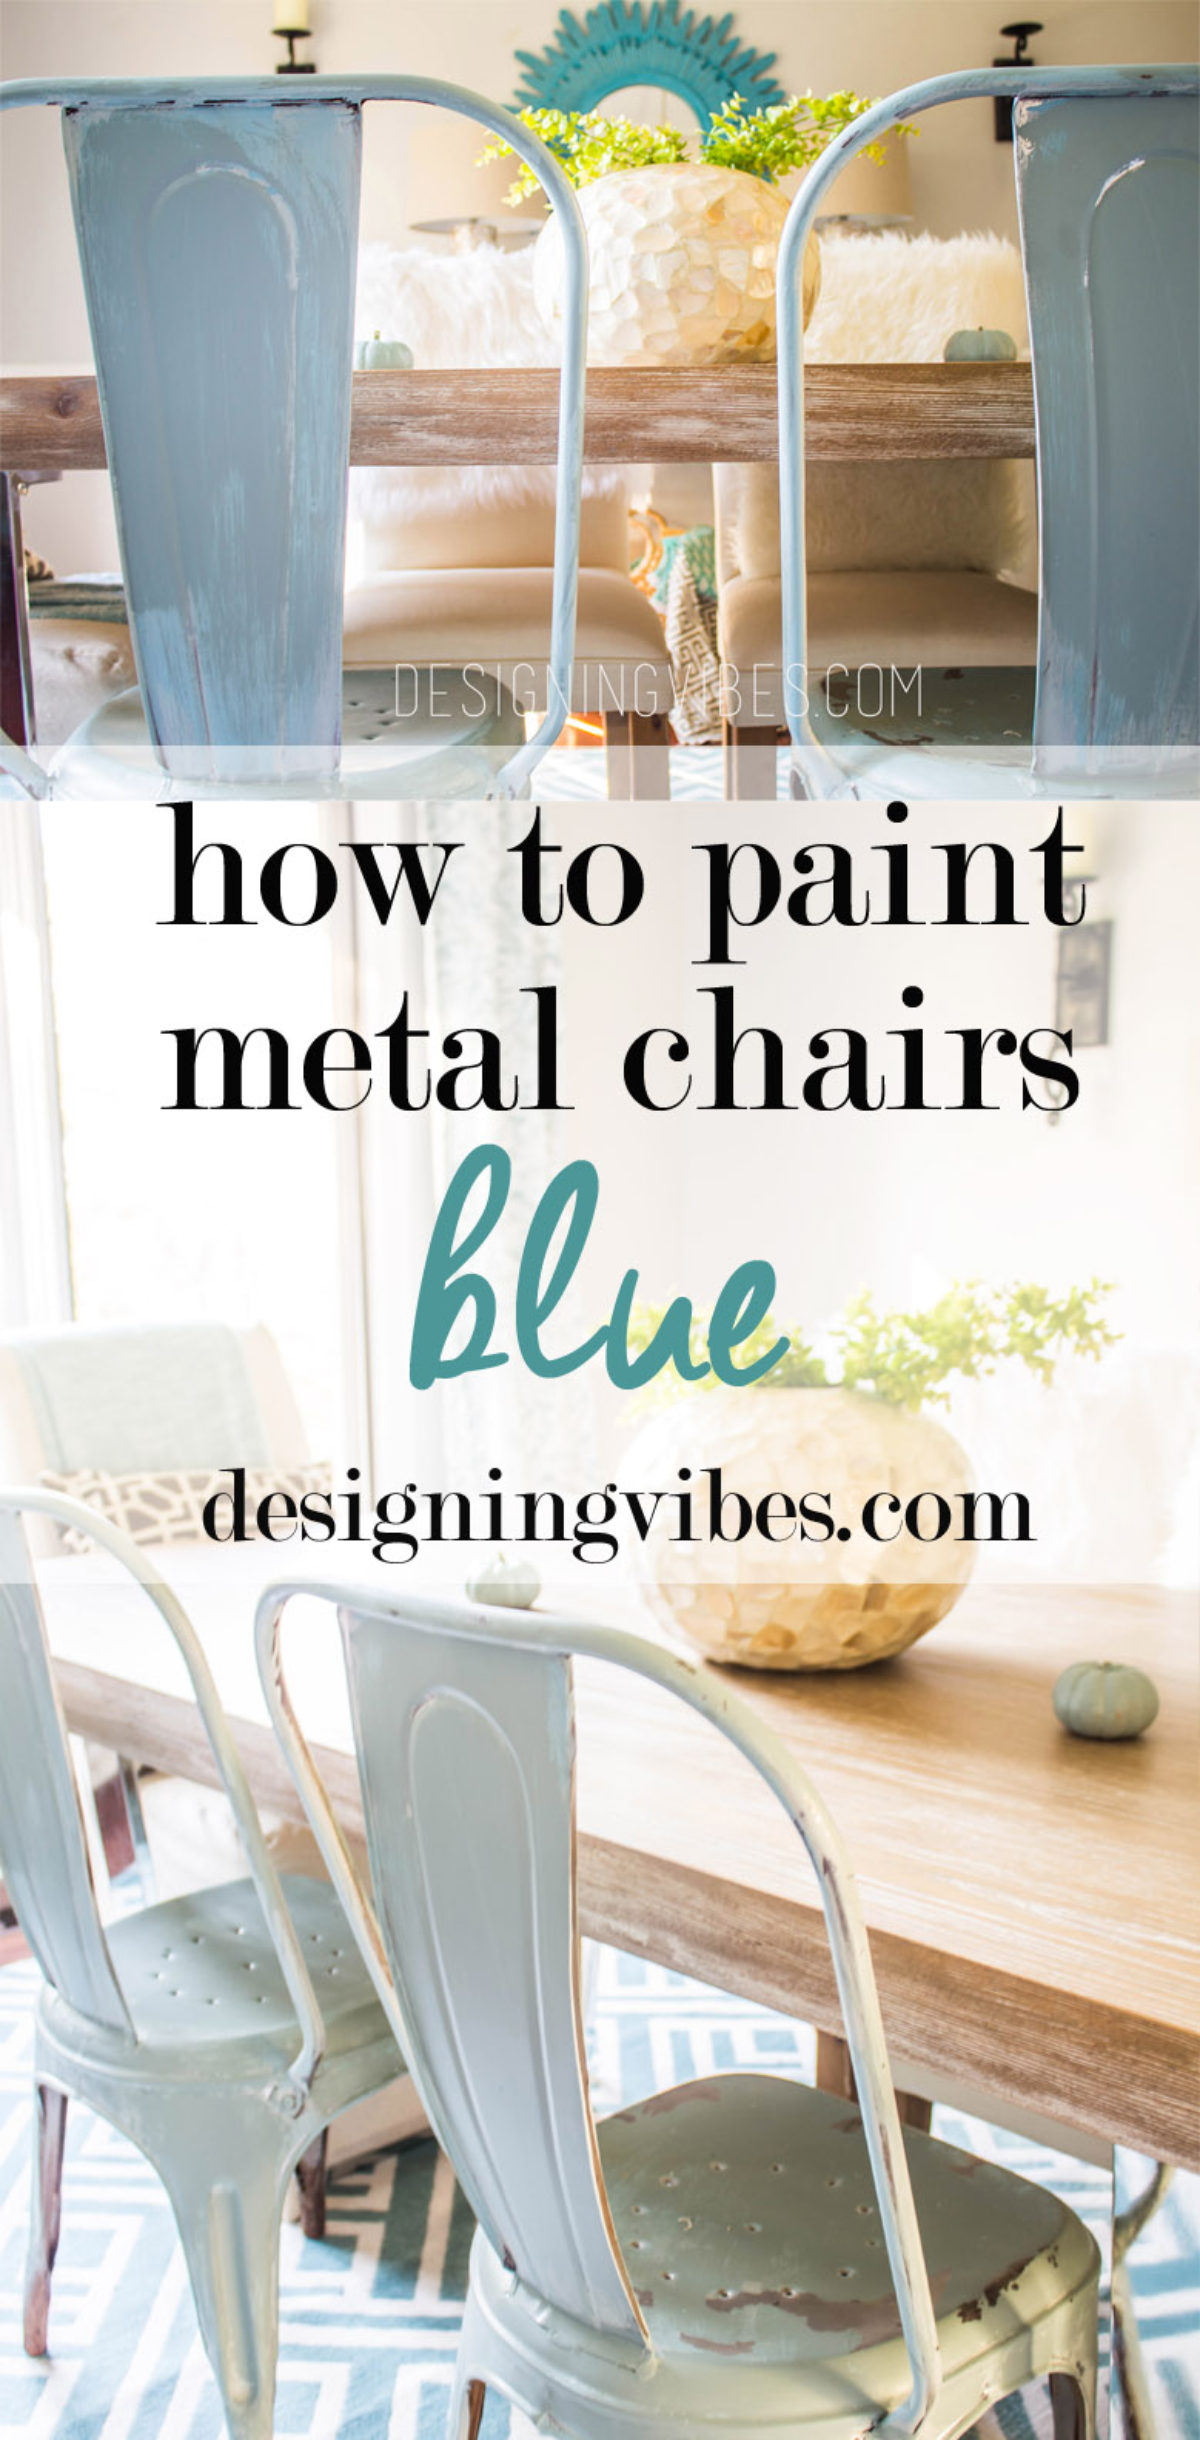 How To Paint Metal Chairs Blue Metal Chairs